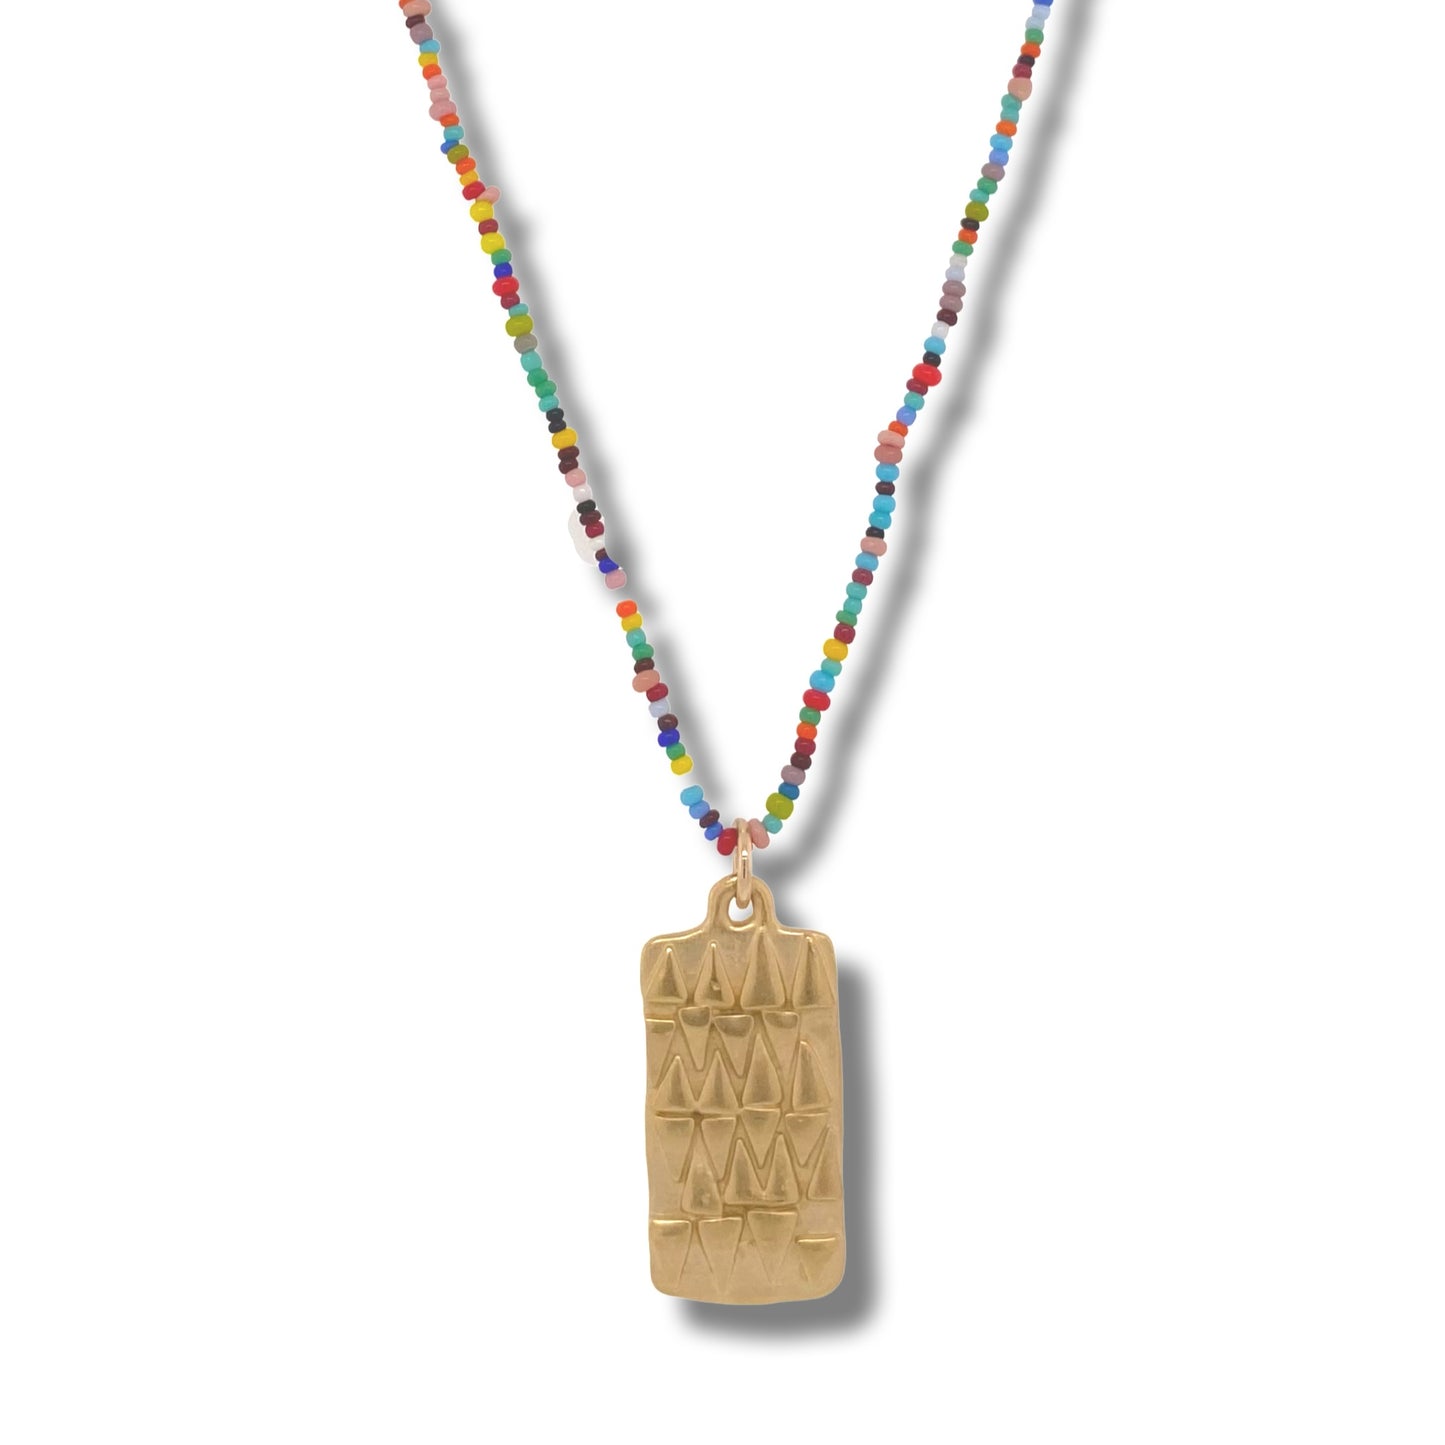 Tribal Vertical Necklace on Multicolor Beads | Nalu | Nantucket